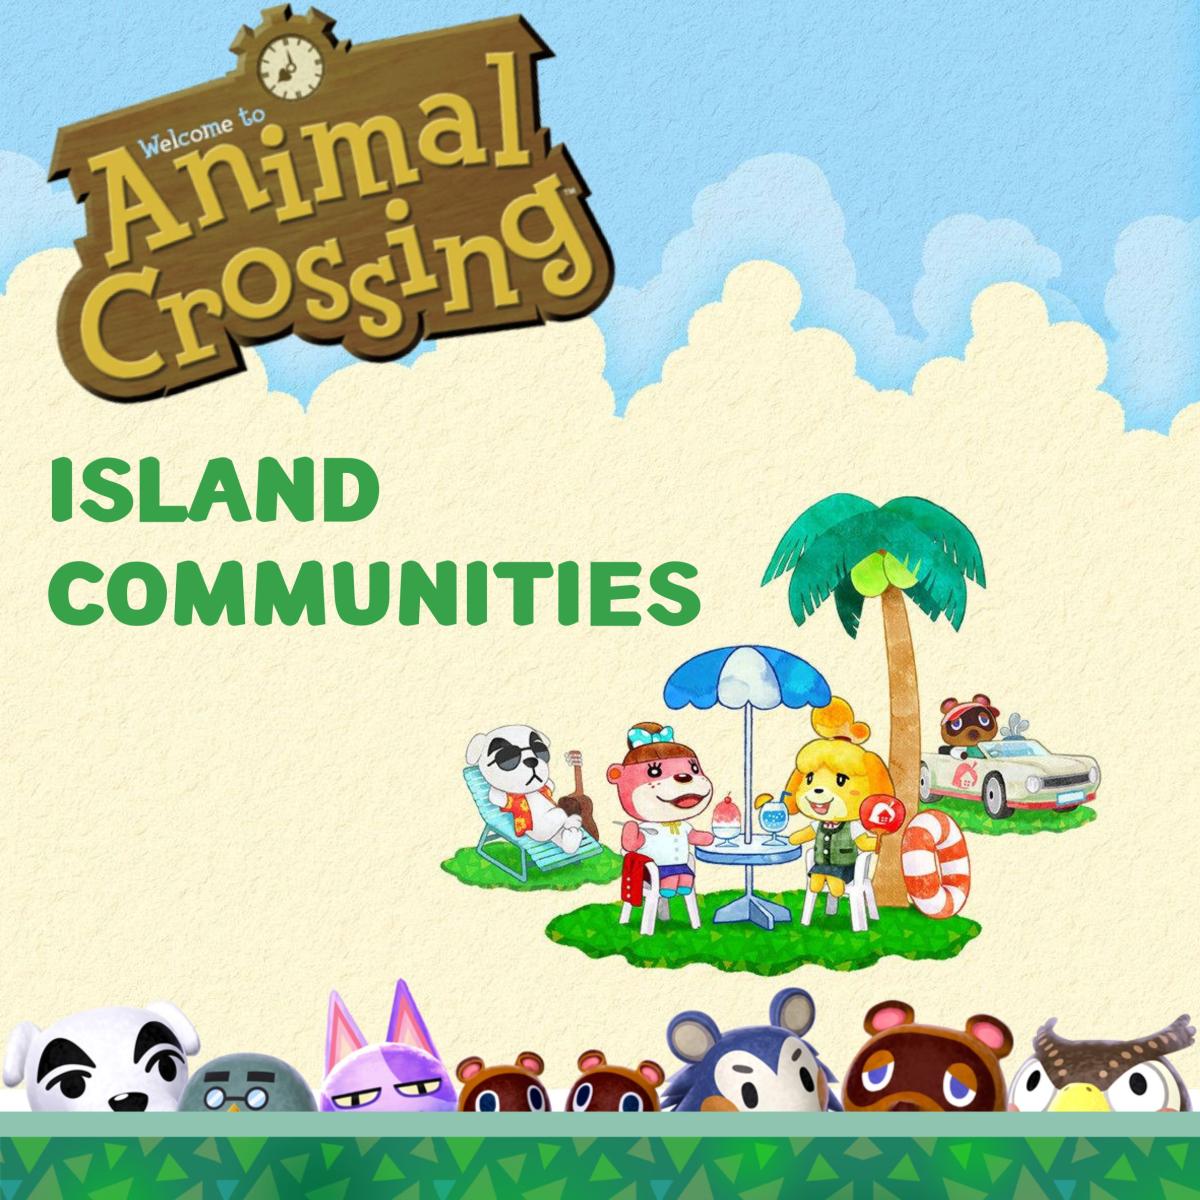 Animal grossing logo and characters